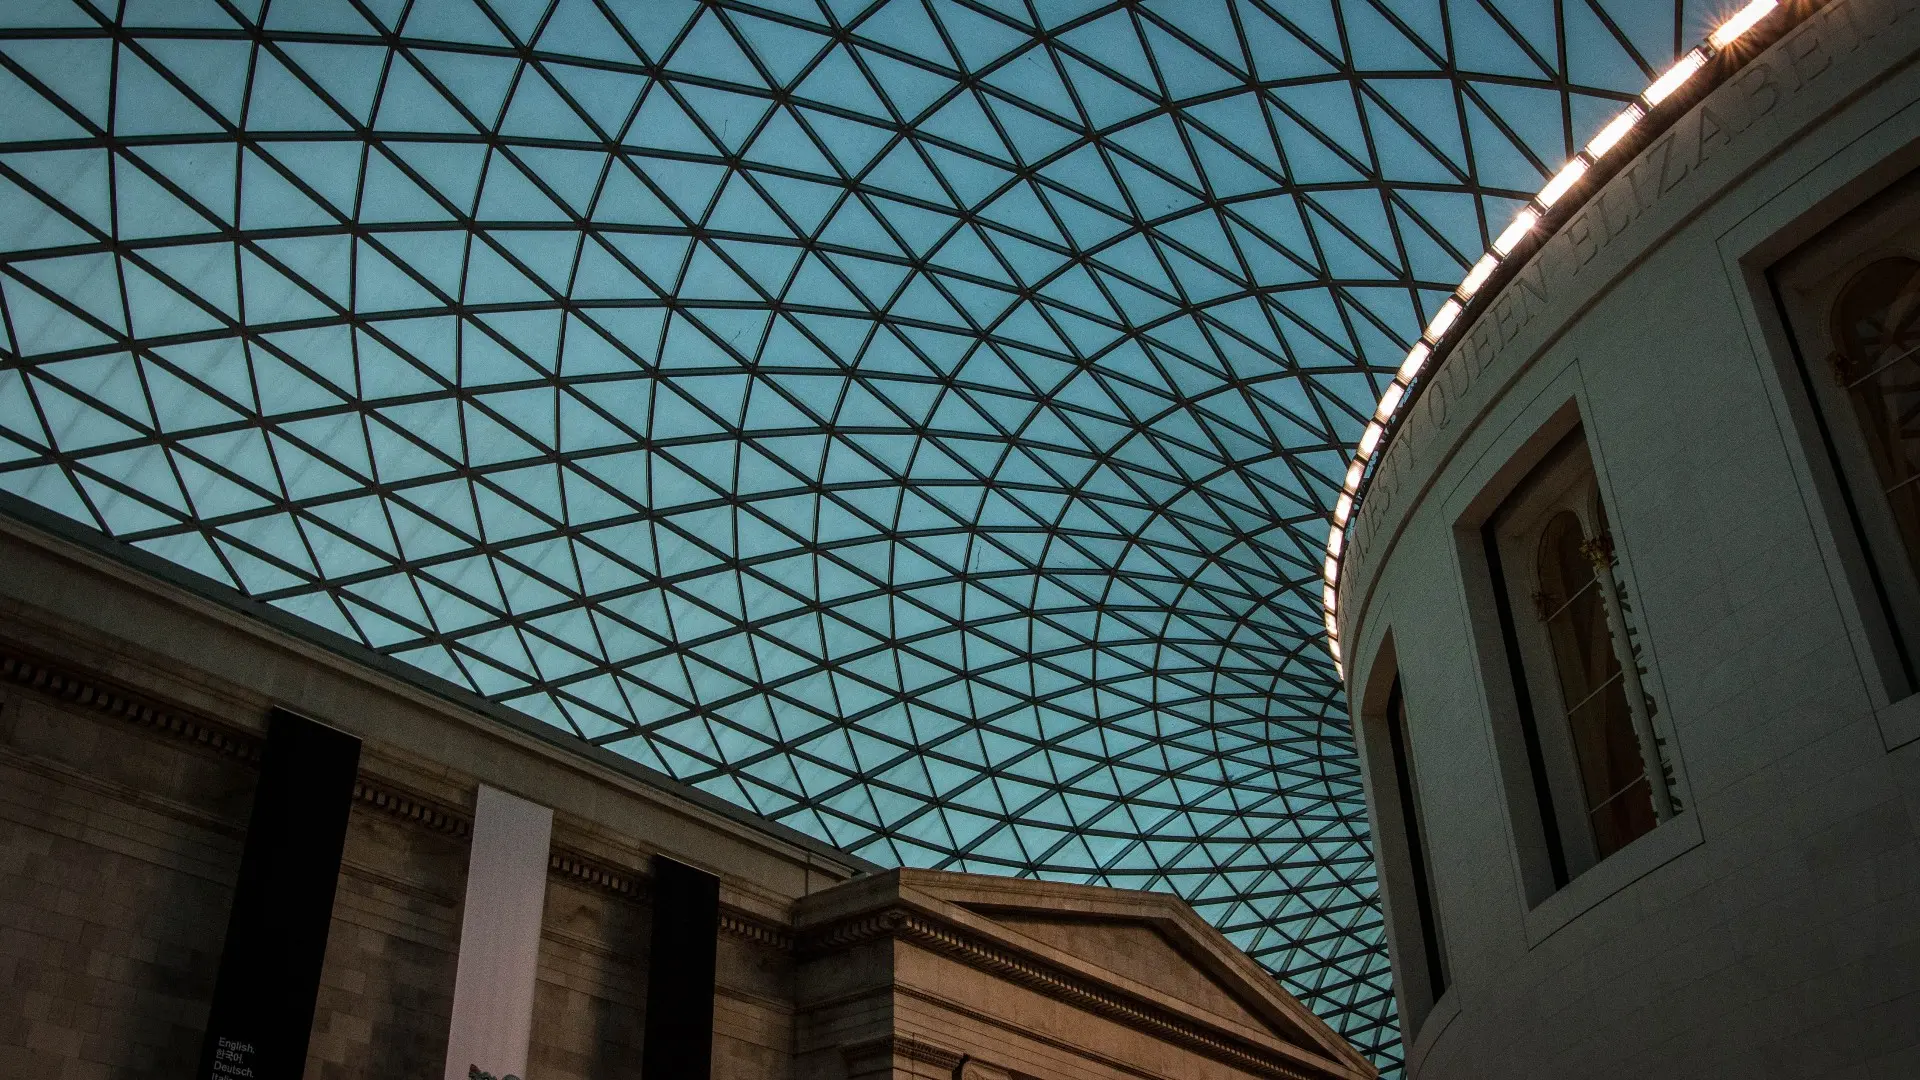 The British Museum from inside